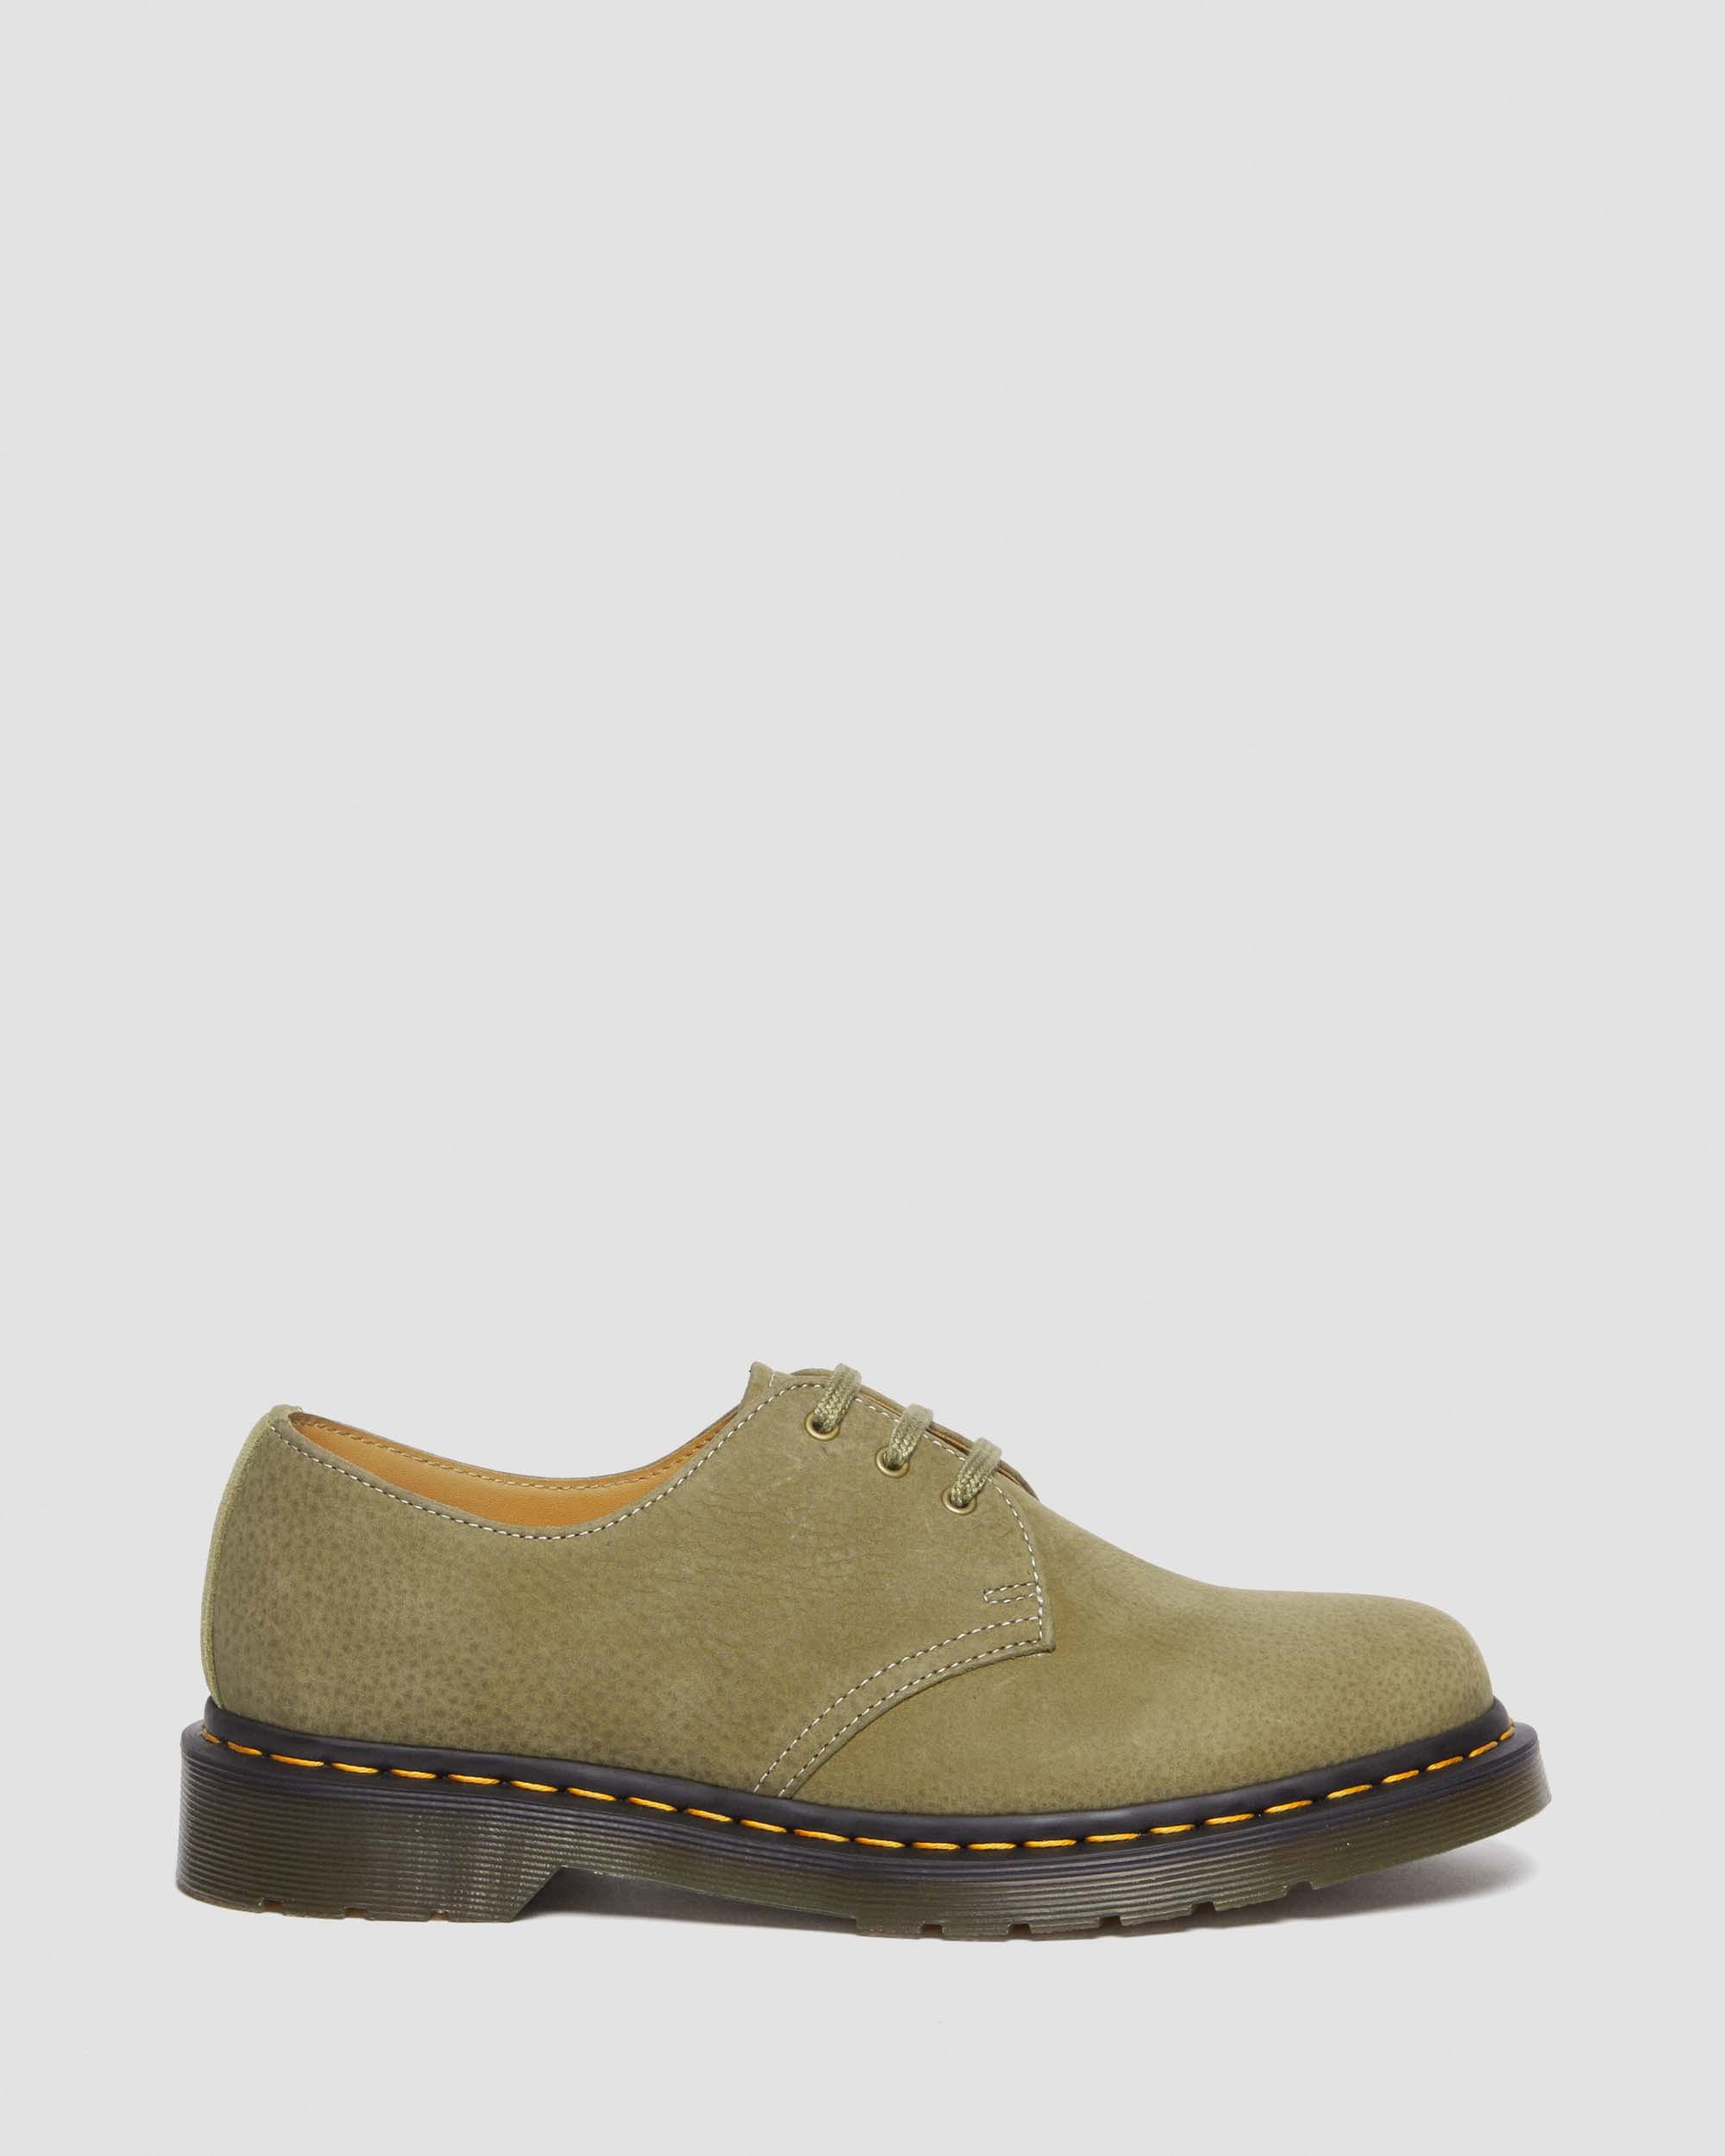 1461 Tumbled Nubuck Leather Oxford Shoes in Muted Olive